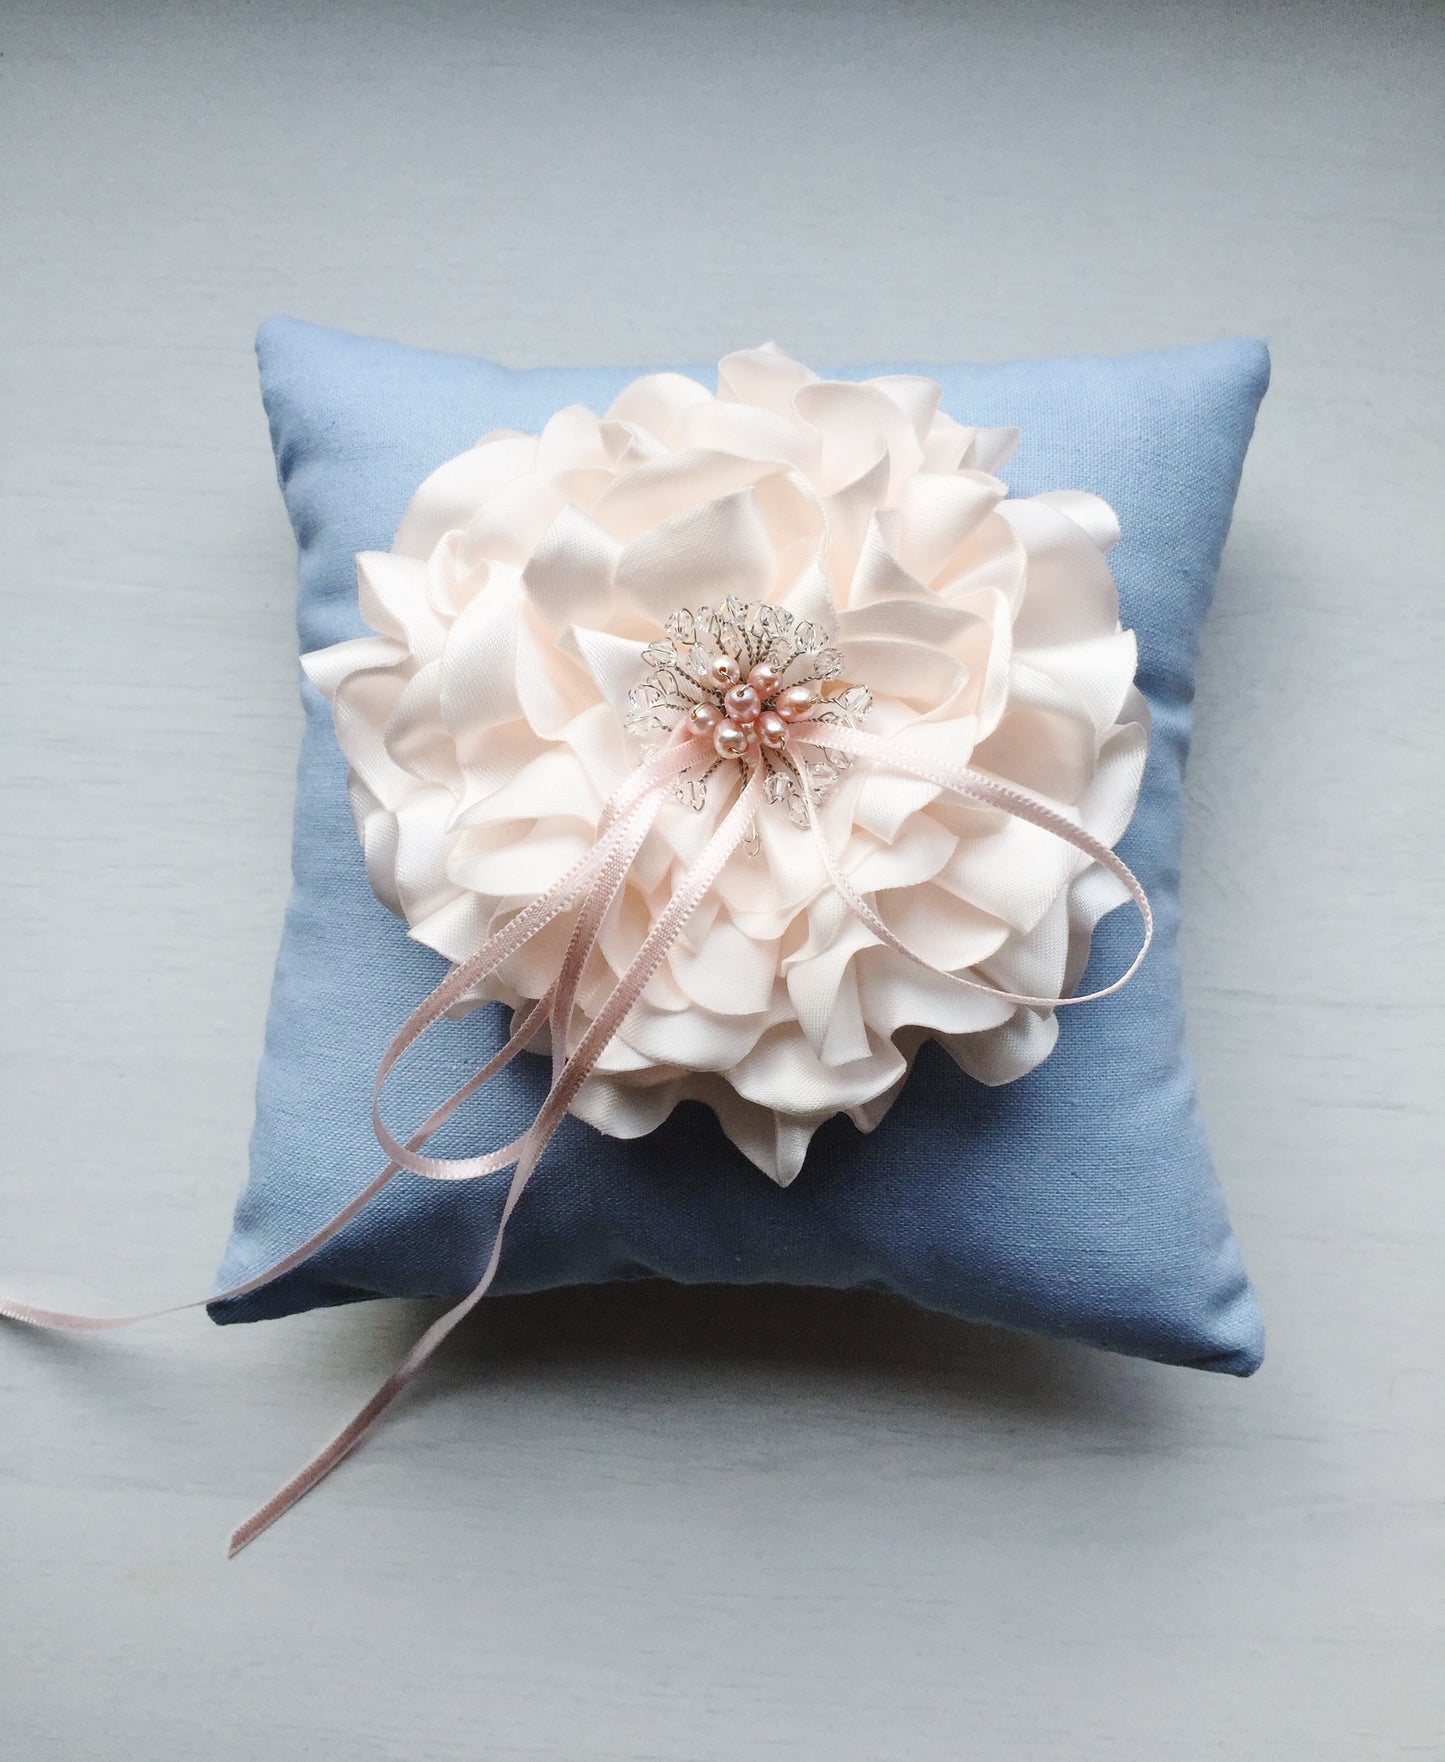 Signature Peony Ring Pillow in Vintage Sky Blue and Power Pink Peony